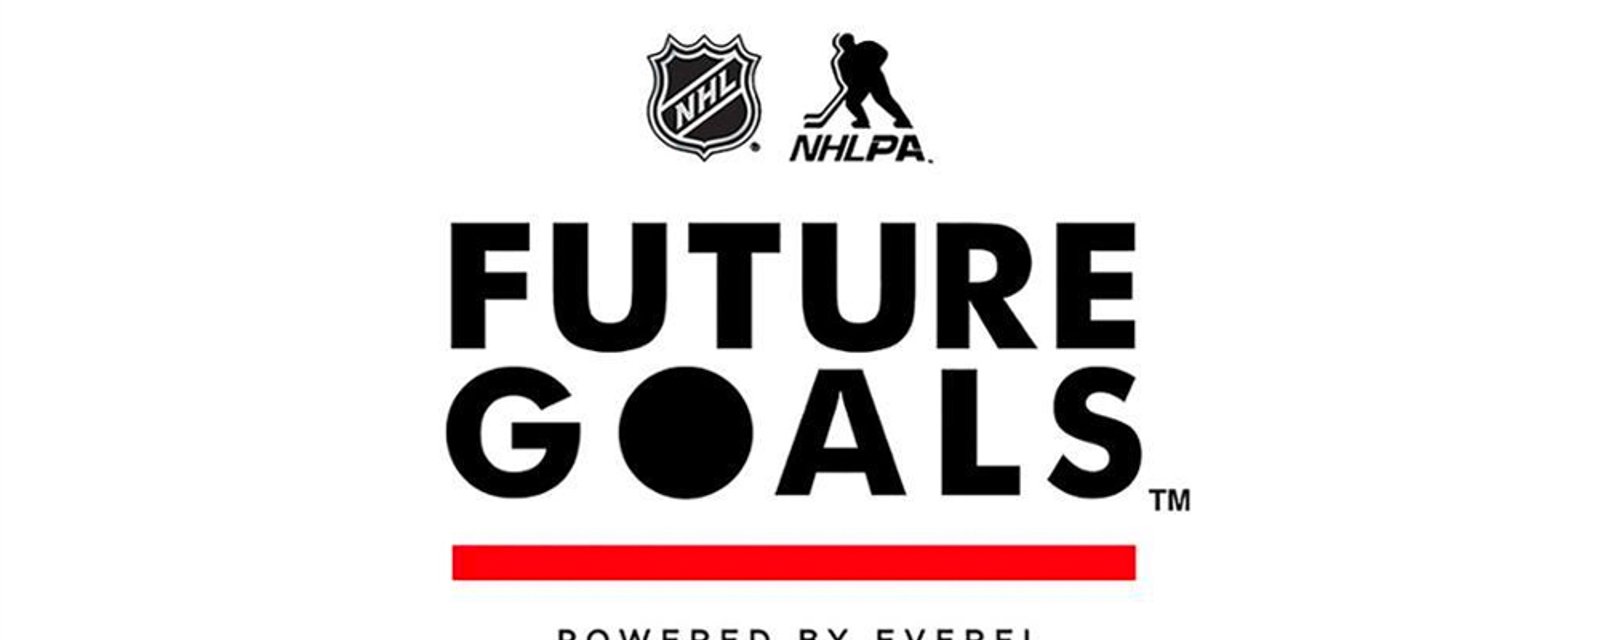 NHL provides free access to Future Goals educational program for kids stuck at home